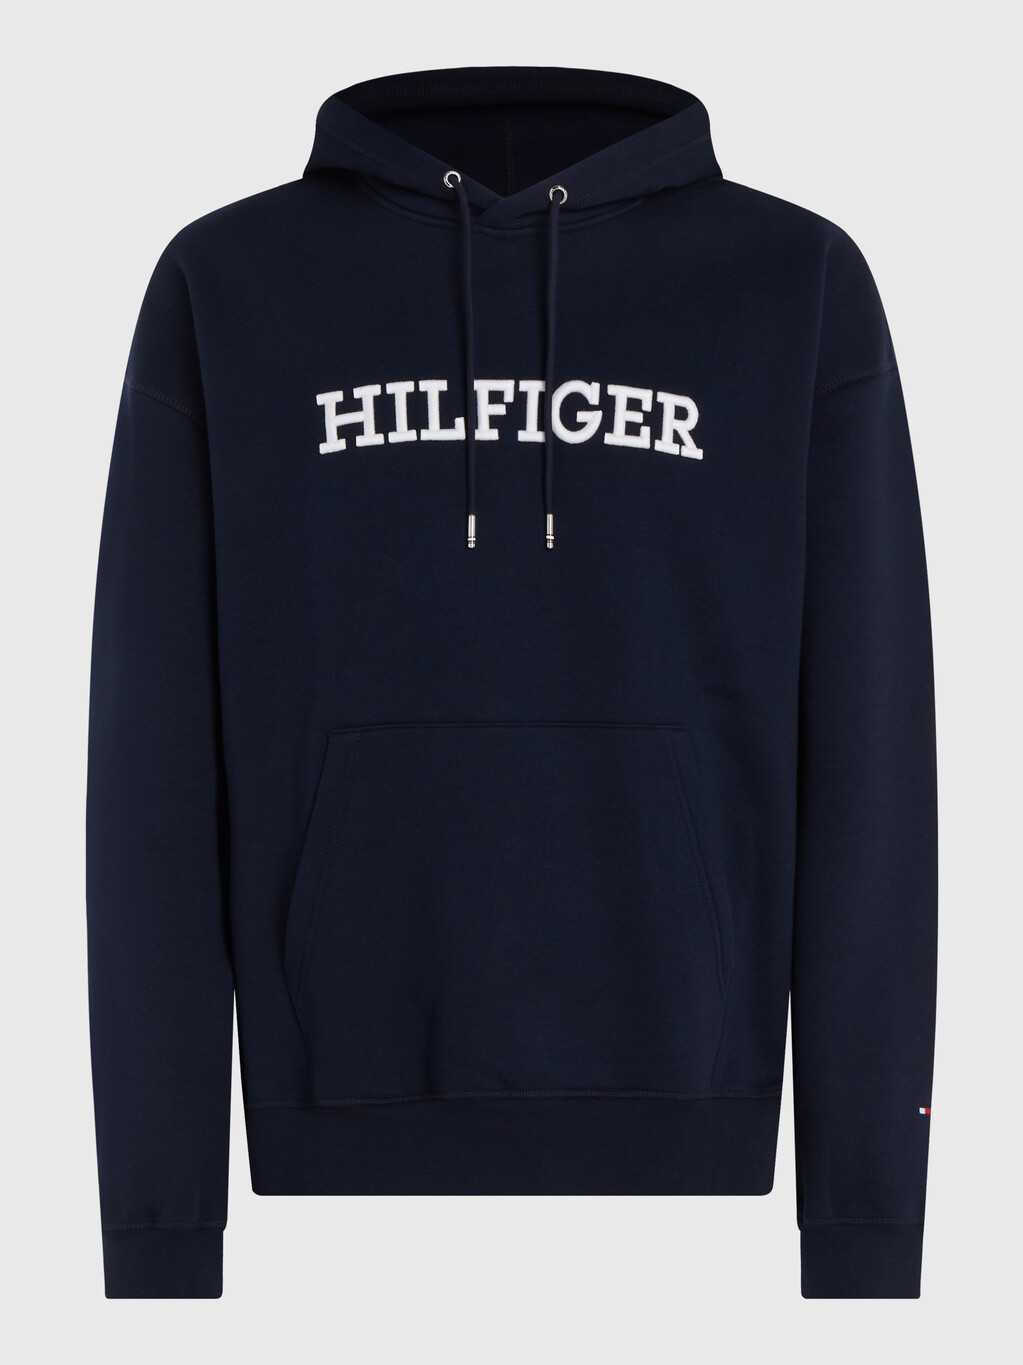 Hilfiger Monotype Embroidery Archive Fit Hoody, Desert Sky, hi-res